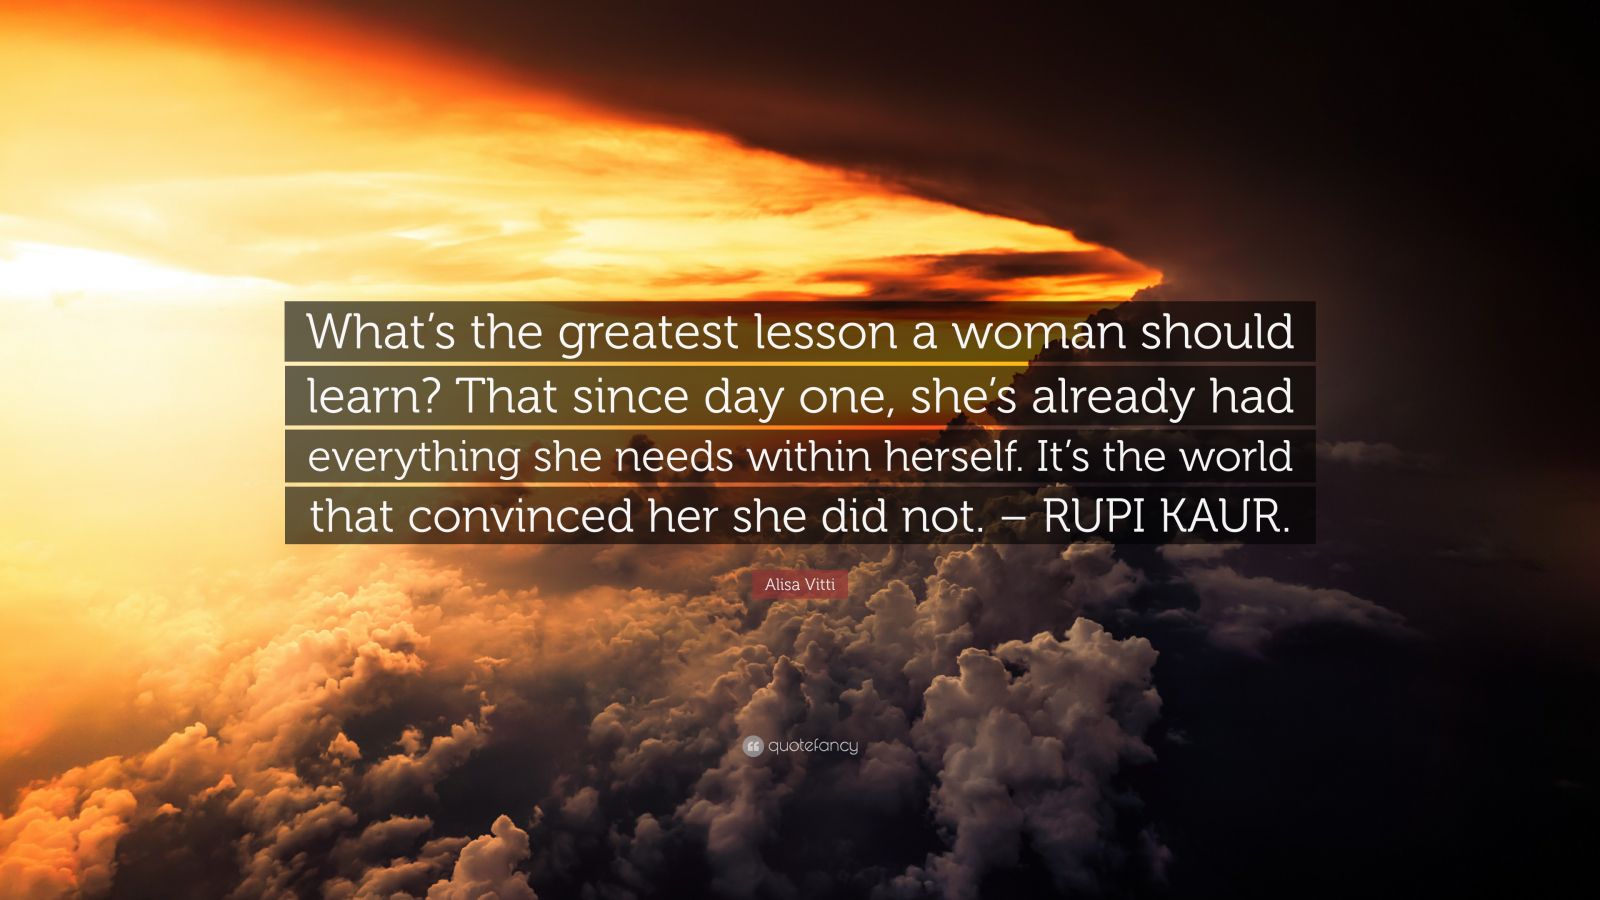 Quoootes - What's the greatest lesson a woman should learn? That